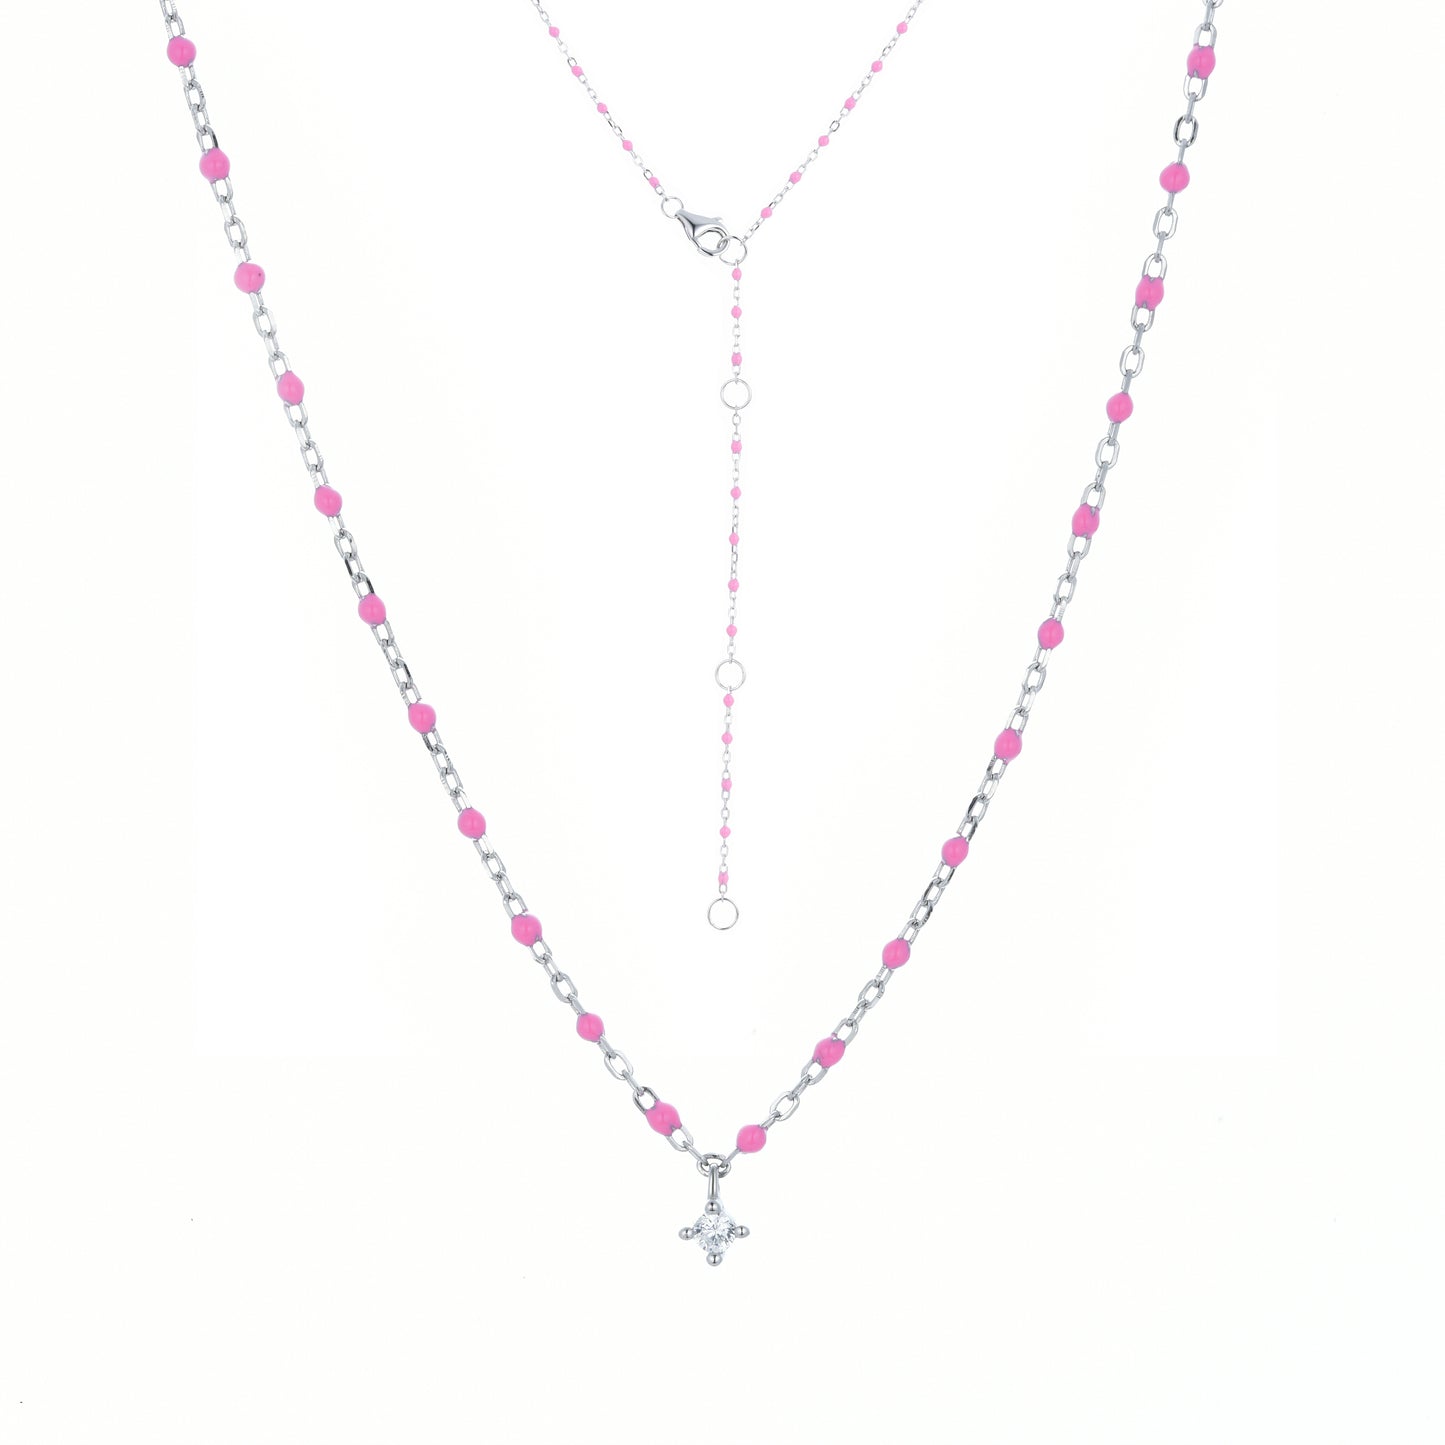 NG-10/S/F - Chain and Bead Necklace with Cubic Zirconia (New Colour)